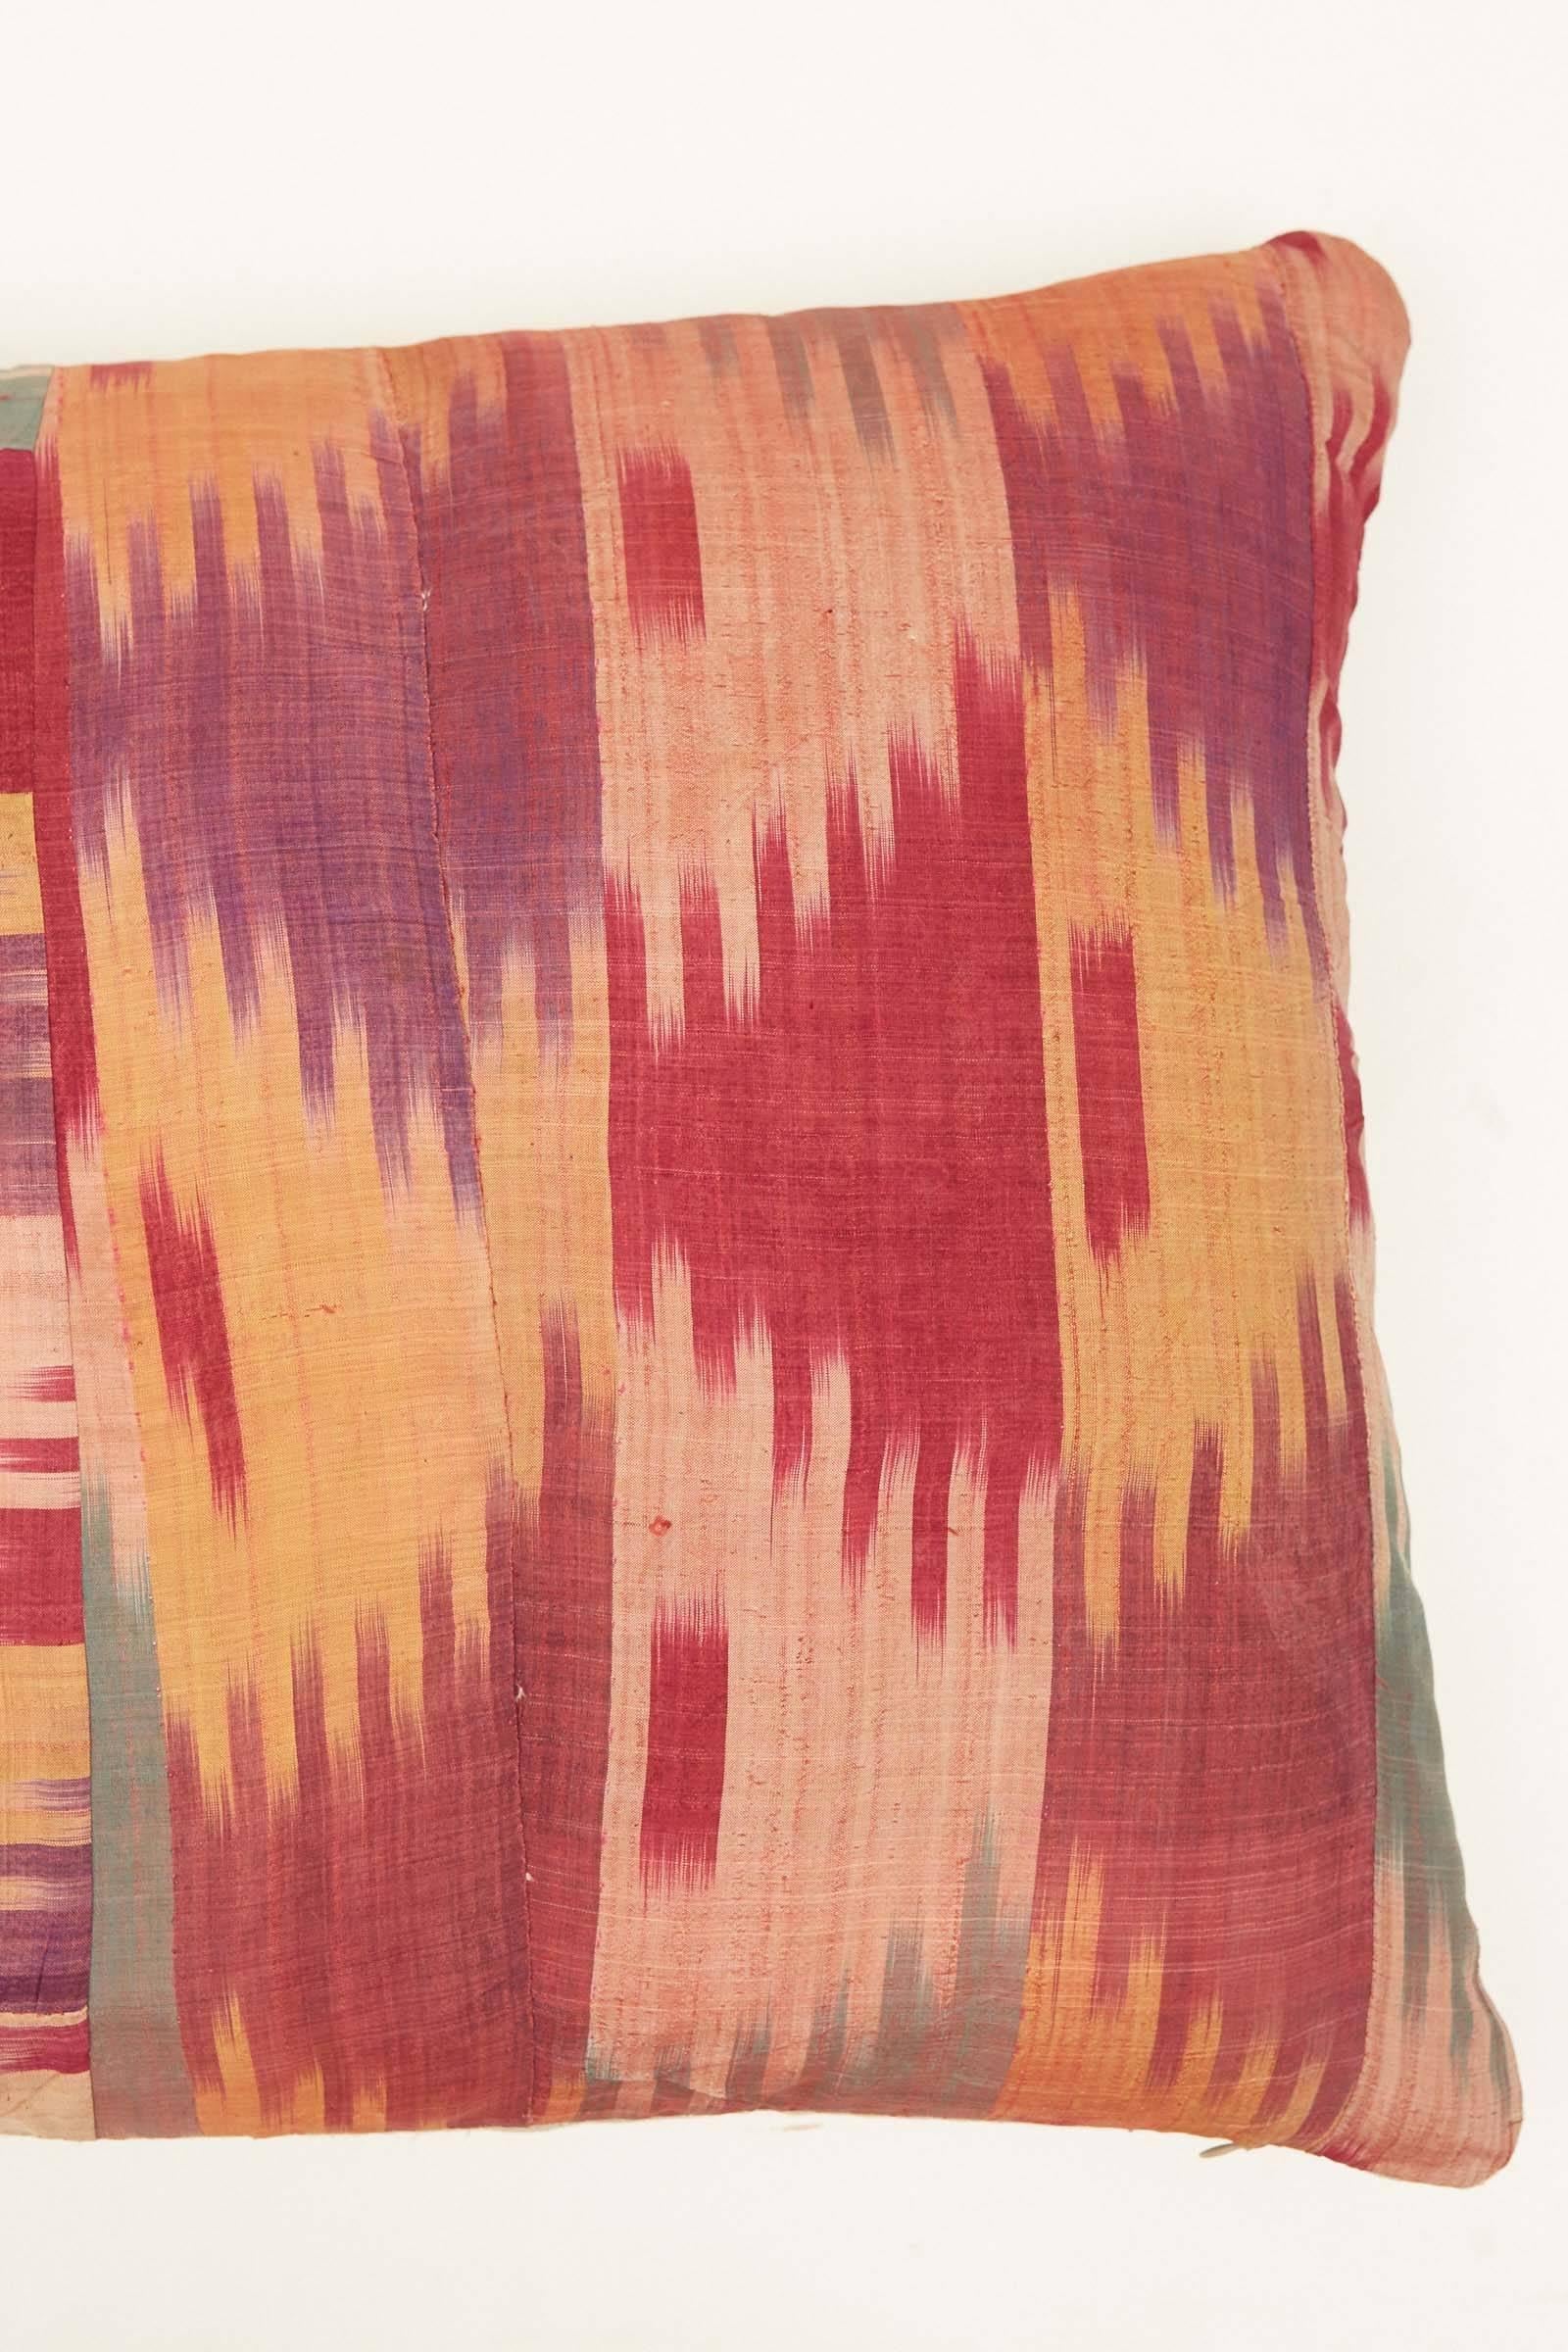 Mid-Century Afghani silk Ikat strips sewn together. Red, turquoise, gold, purple and pale pink. Natural linen backs. Invisible zippers. Feather and down fill. Measures: 19 x 26.